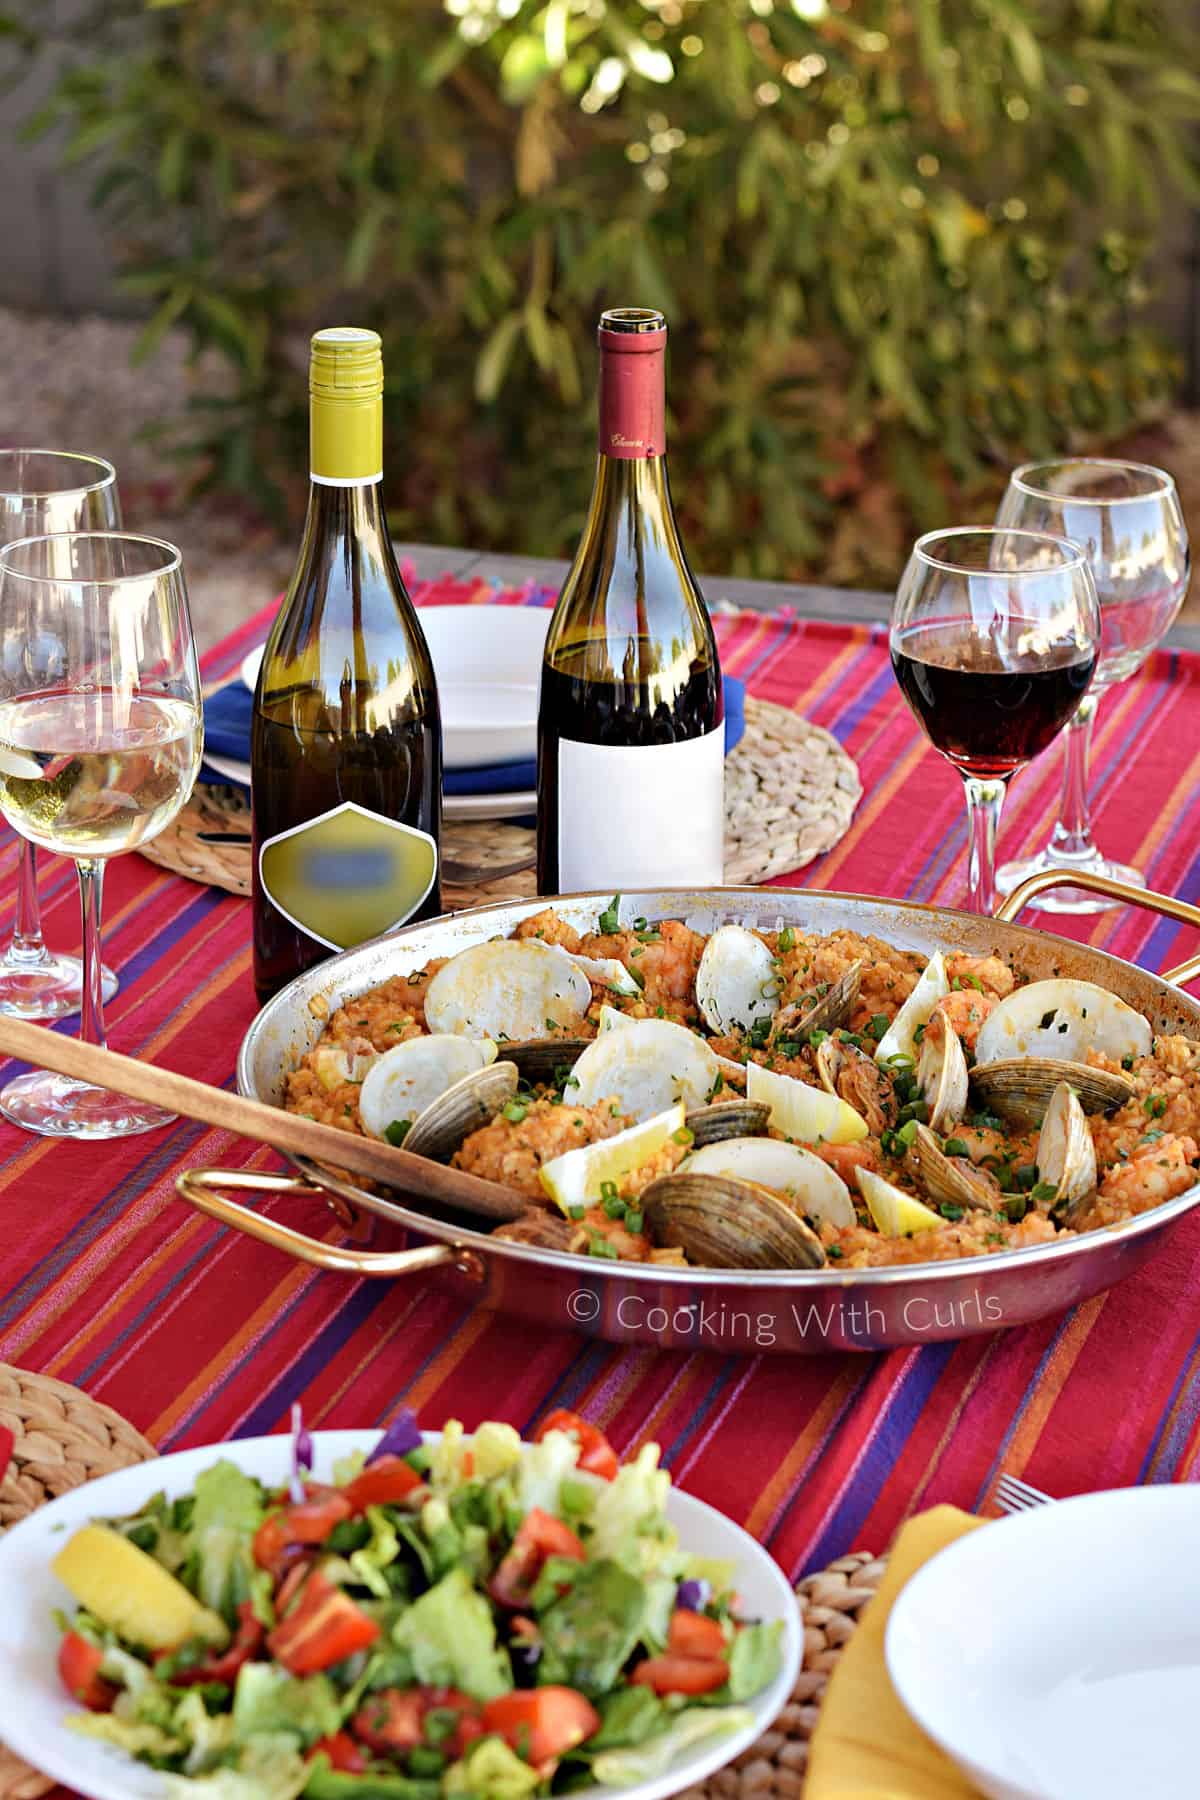 Seafood and rice in a large paella pan outside on a striped tablecloth surrounded by wine bottles and salad.